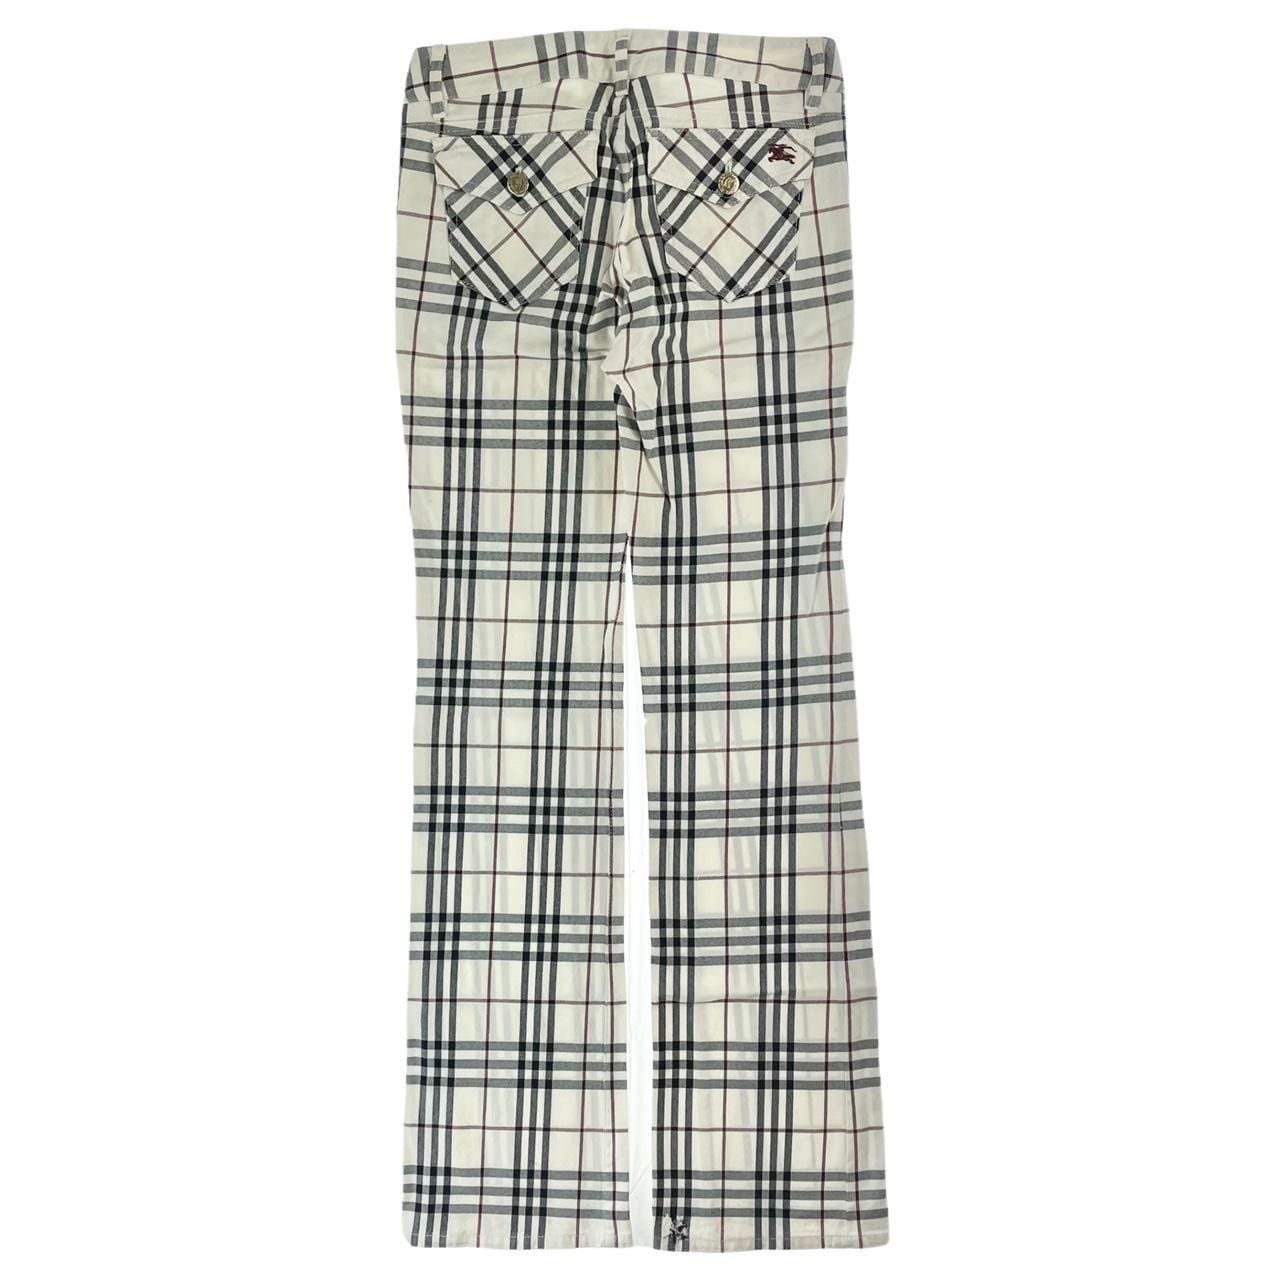 BURBERRY trousers in check wool  Beige  Burberry pants 8033467 online on  GIGLIOCOM